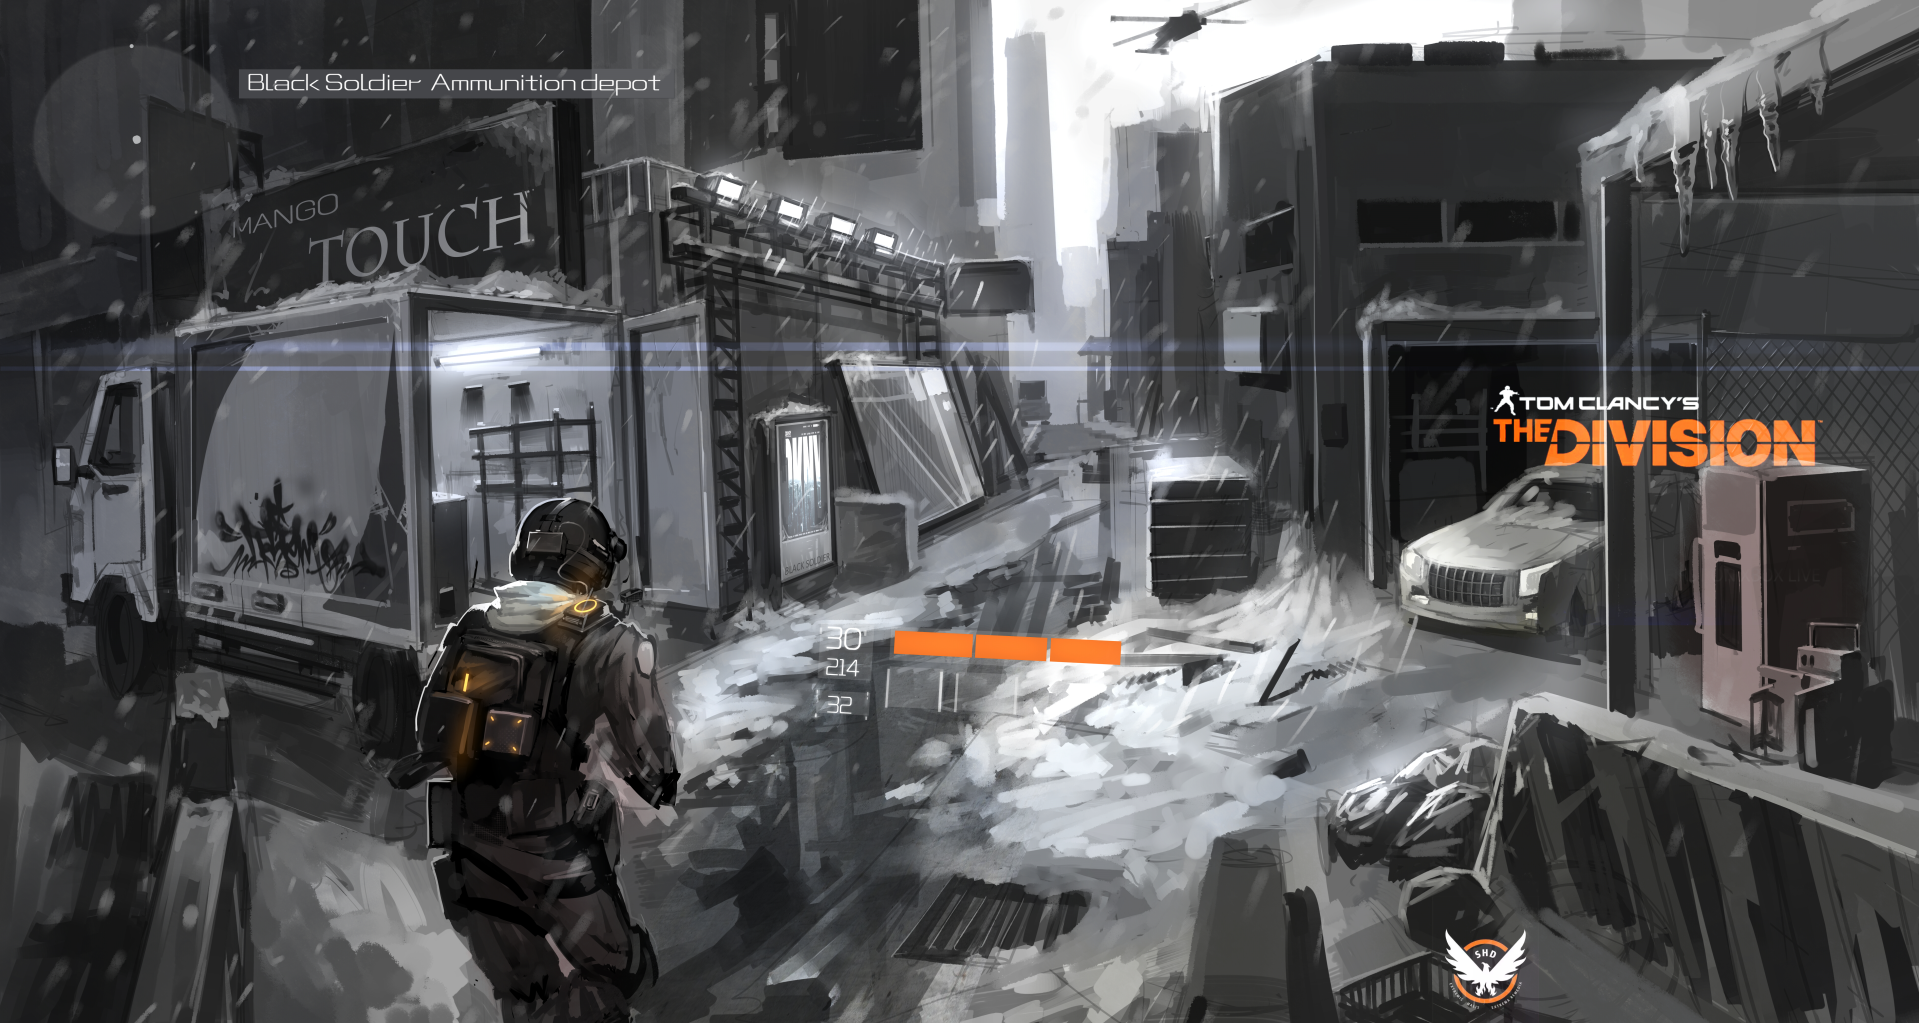 Anime 1919x1023 Tom Clancy's The Division snow city video games Black Soldier PC gaming video game art